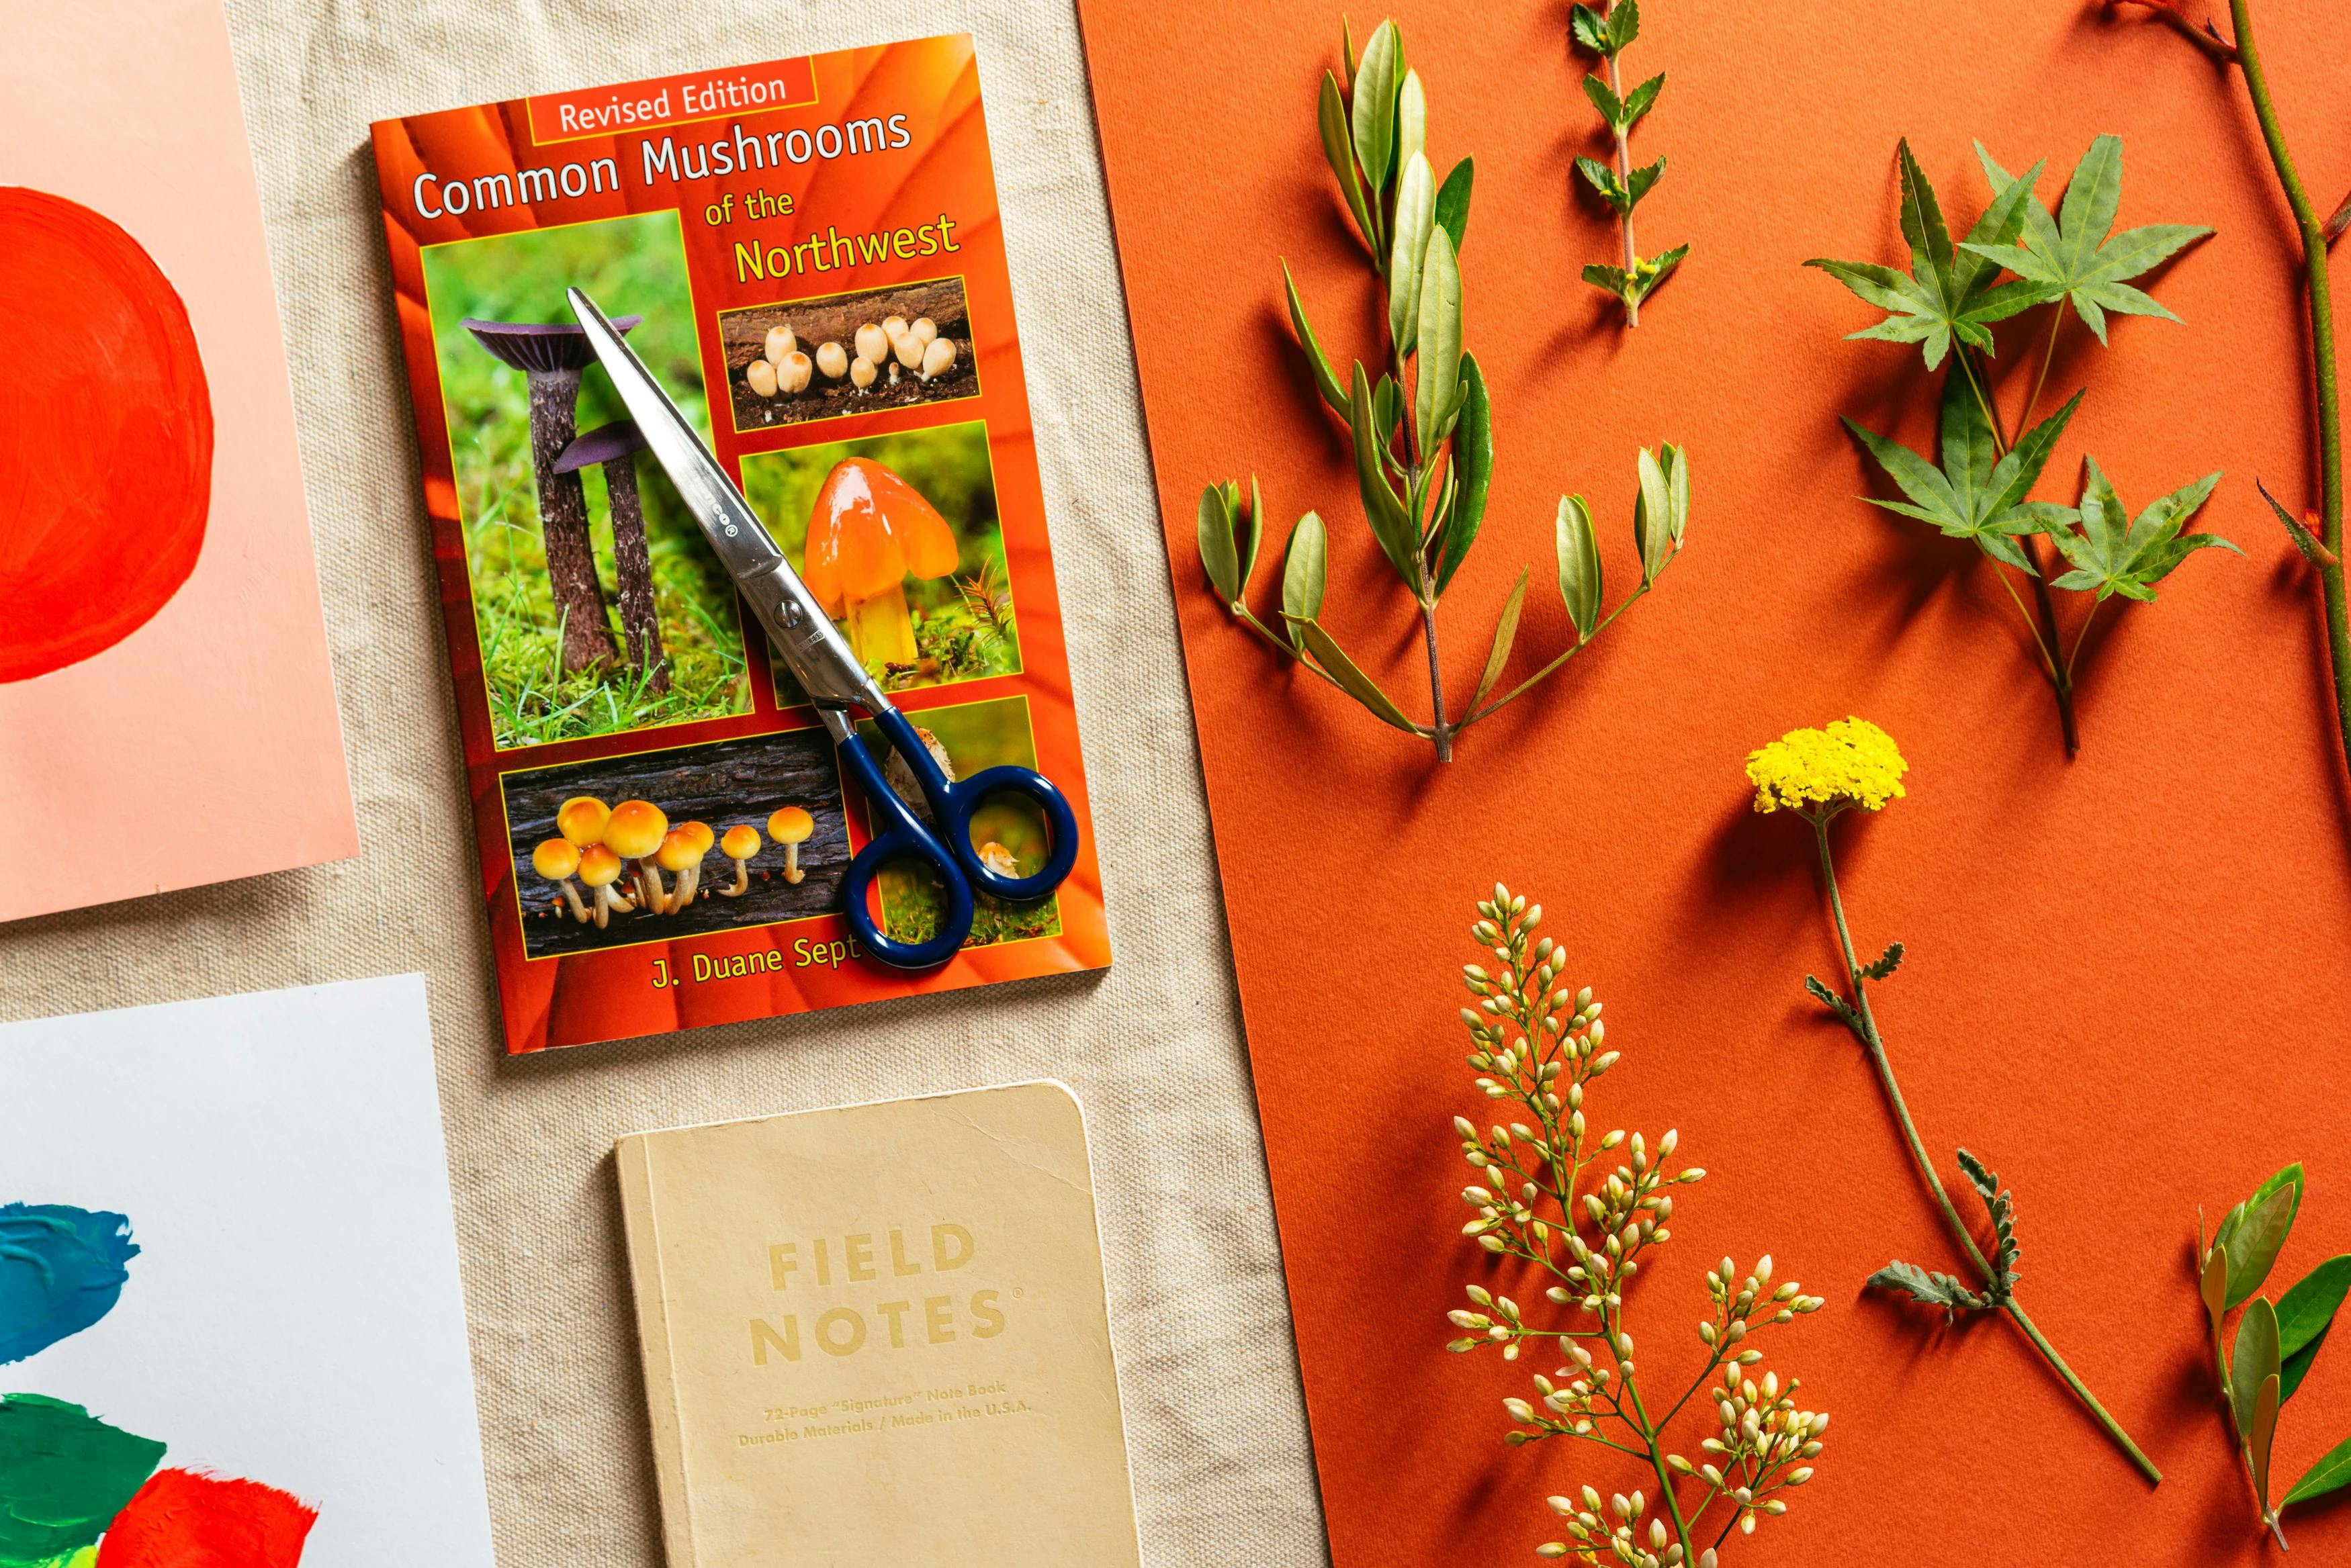 Garden clippings, scissors, and a book about mushrooms on a table in Scott Sueme's studio at MacArthur Place.